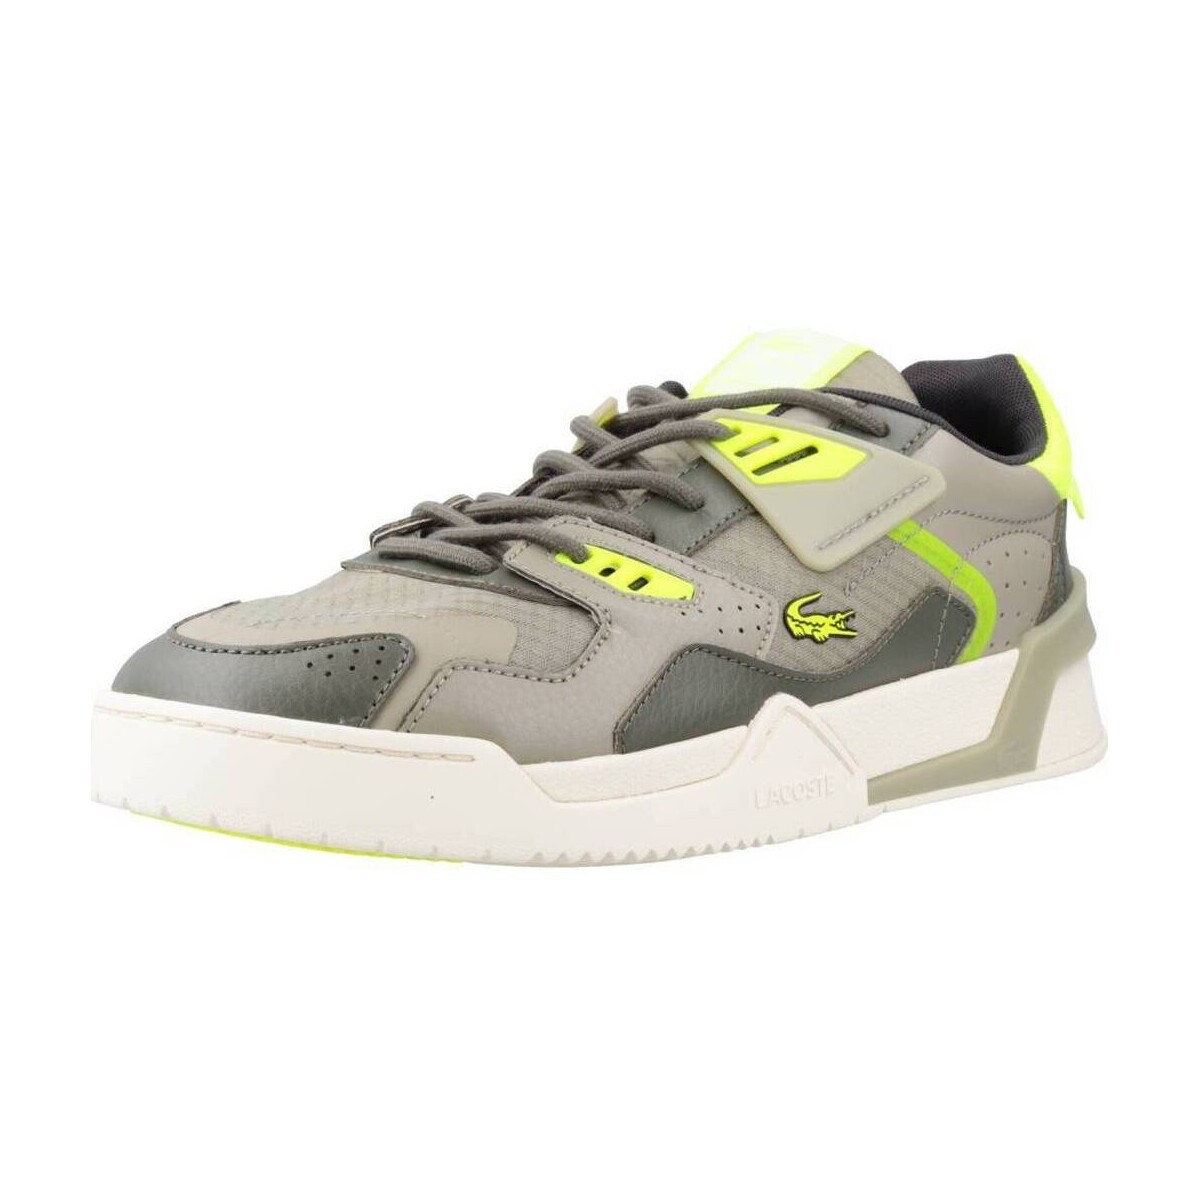 Xαμηλά Sneakers Lacoste LT 125 223 2 SMA